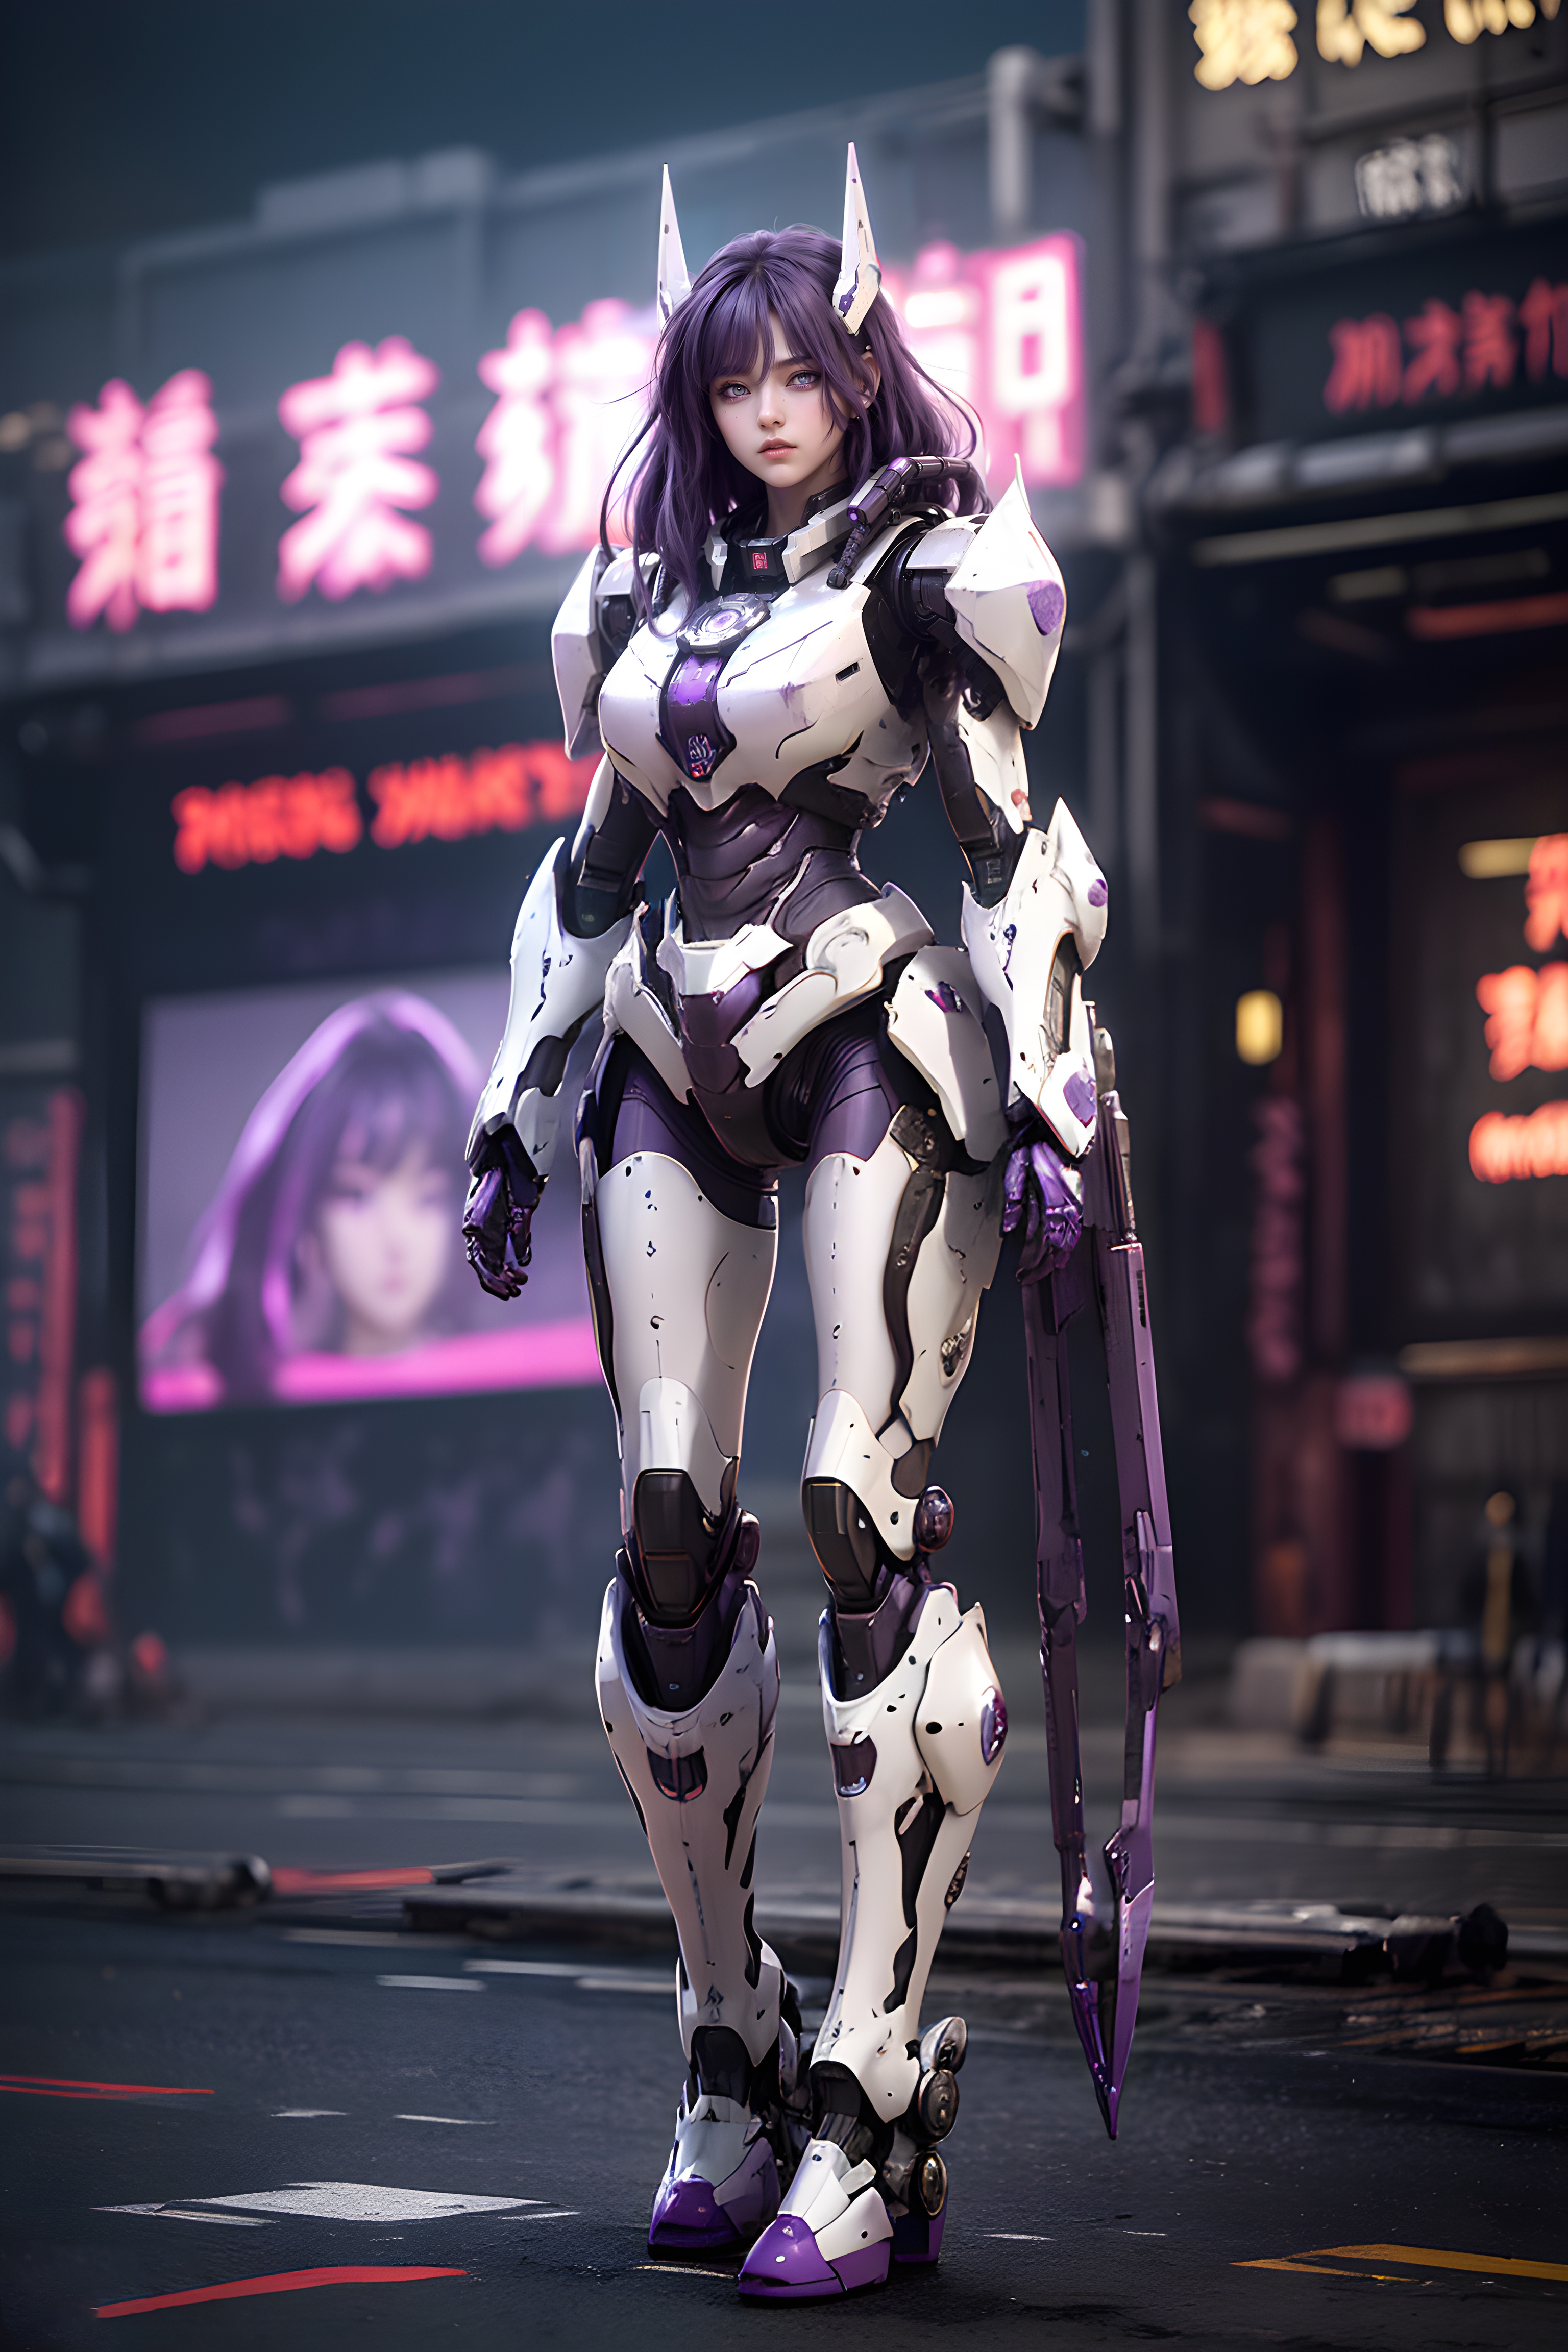 AI model image by ytccat1024443